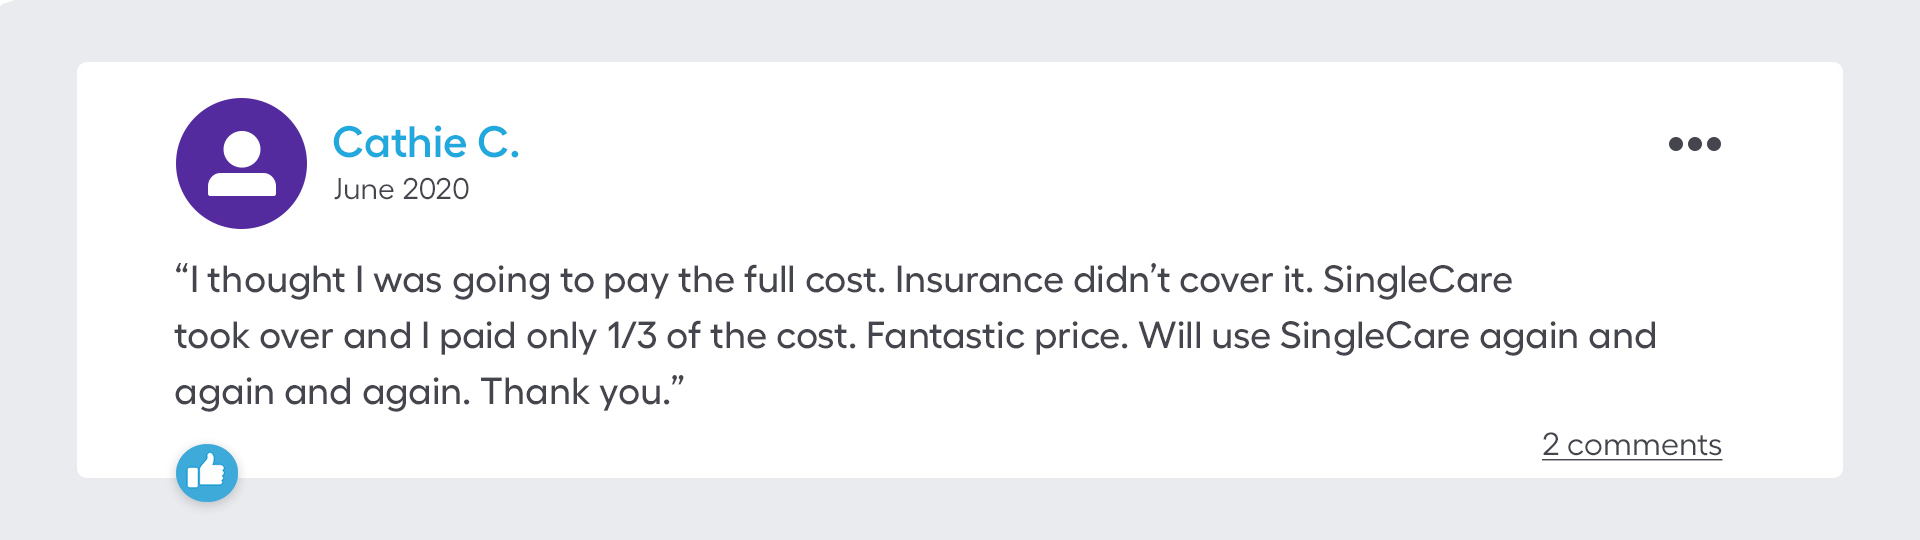 I thought I was going to pay the full cost. Insurance didn’t cover it. SingleCare took over and I paid only 1/3 of the cost. Fantastic price. Will use SingleCare again and again and again. Thank you.